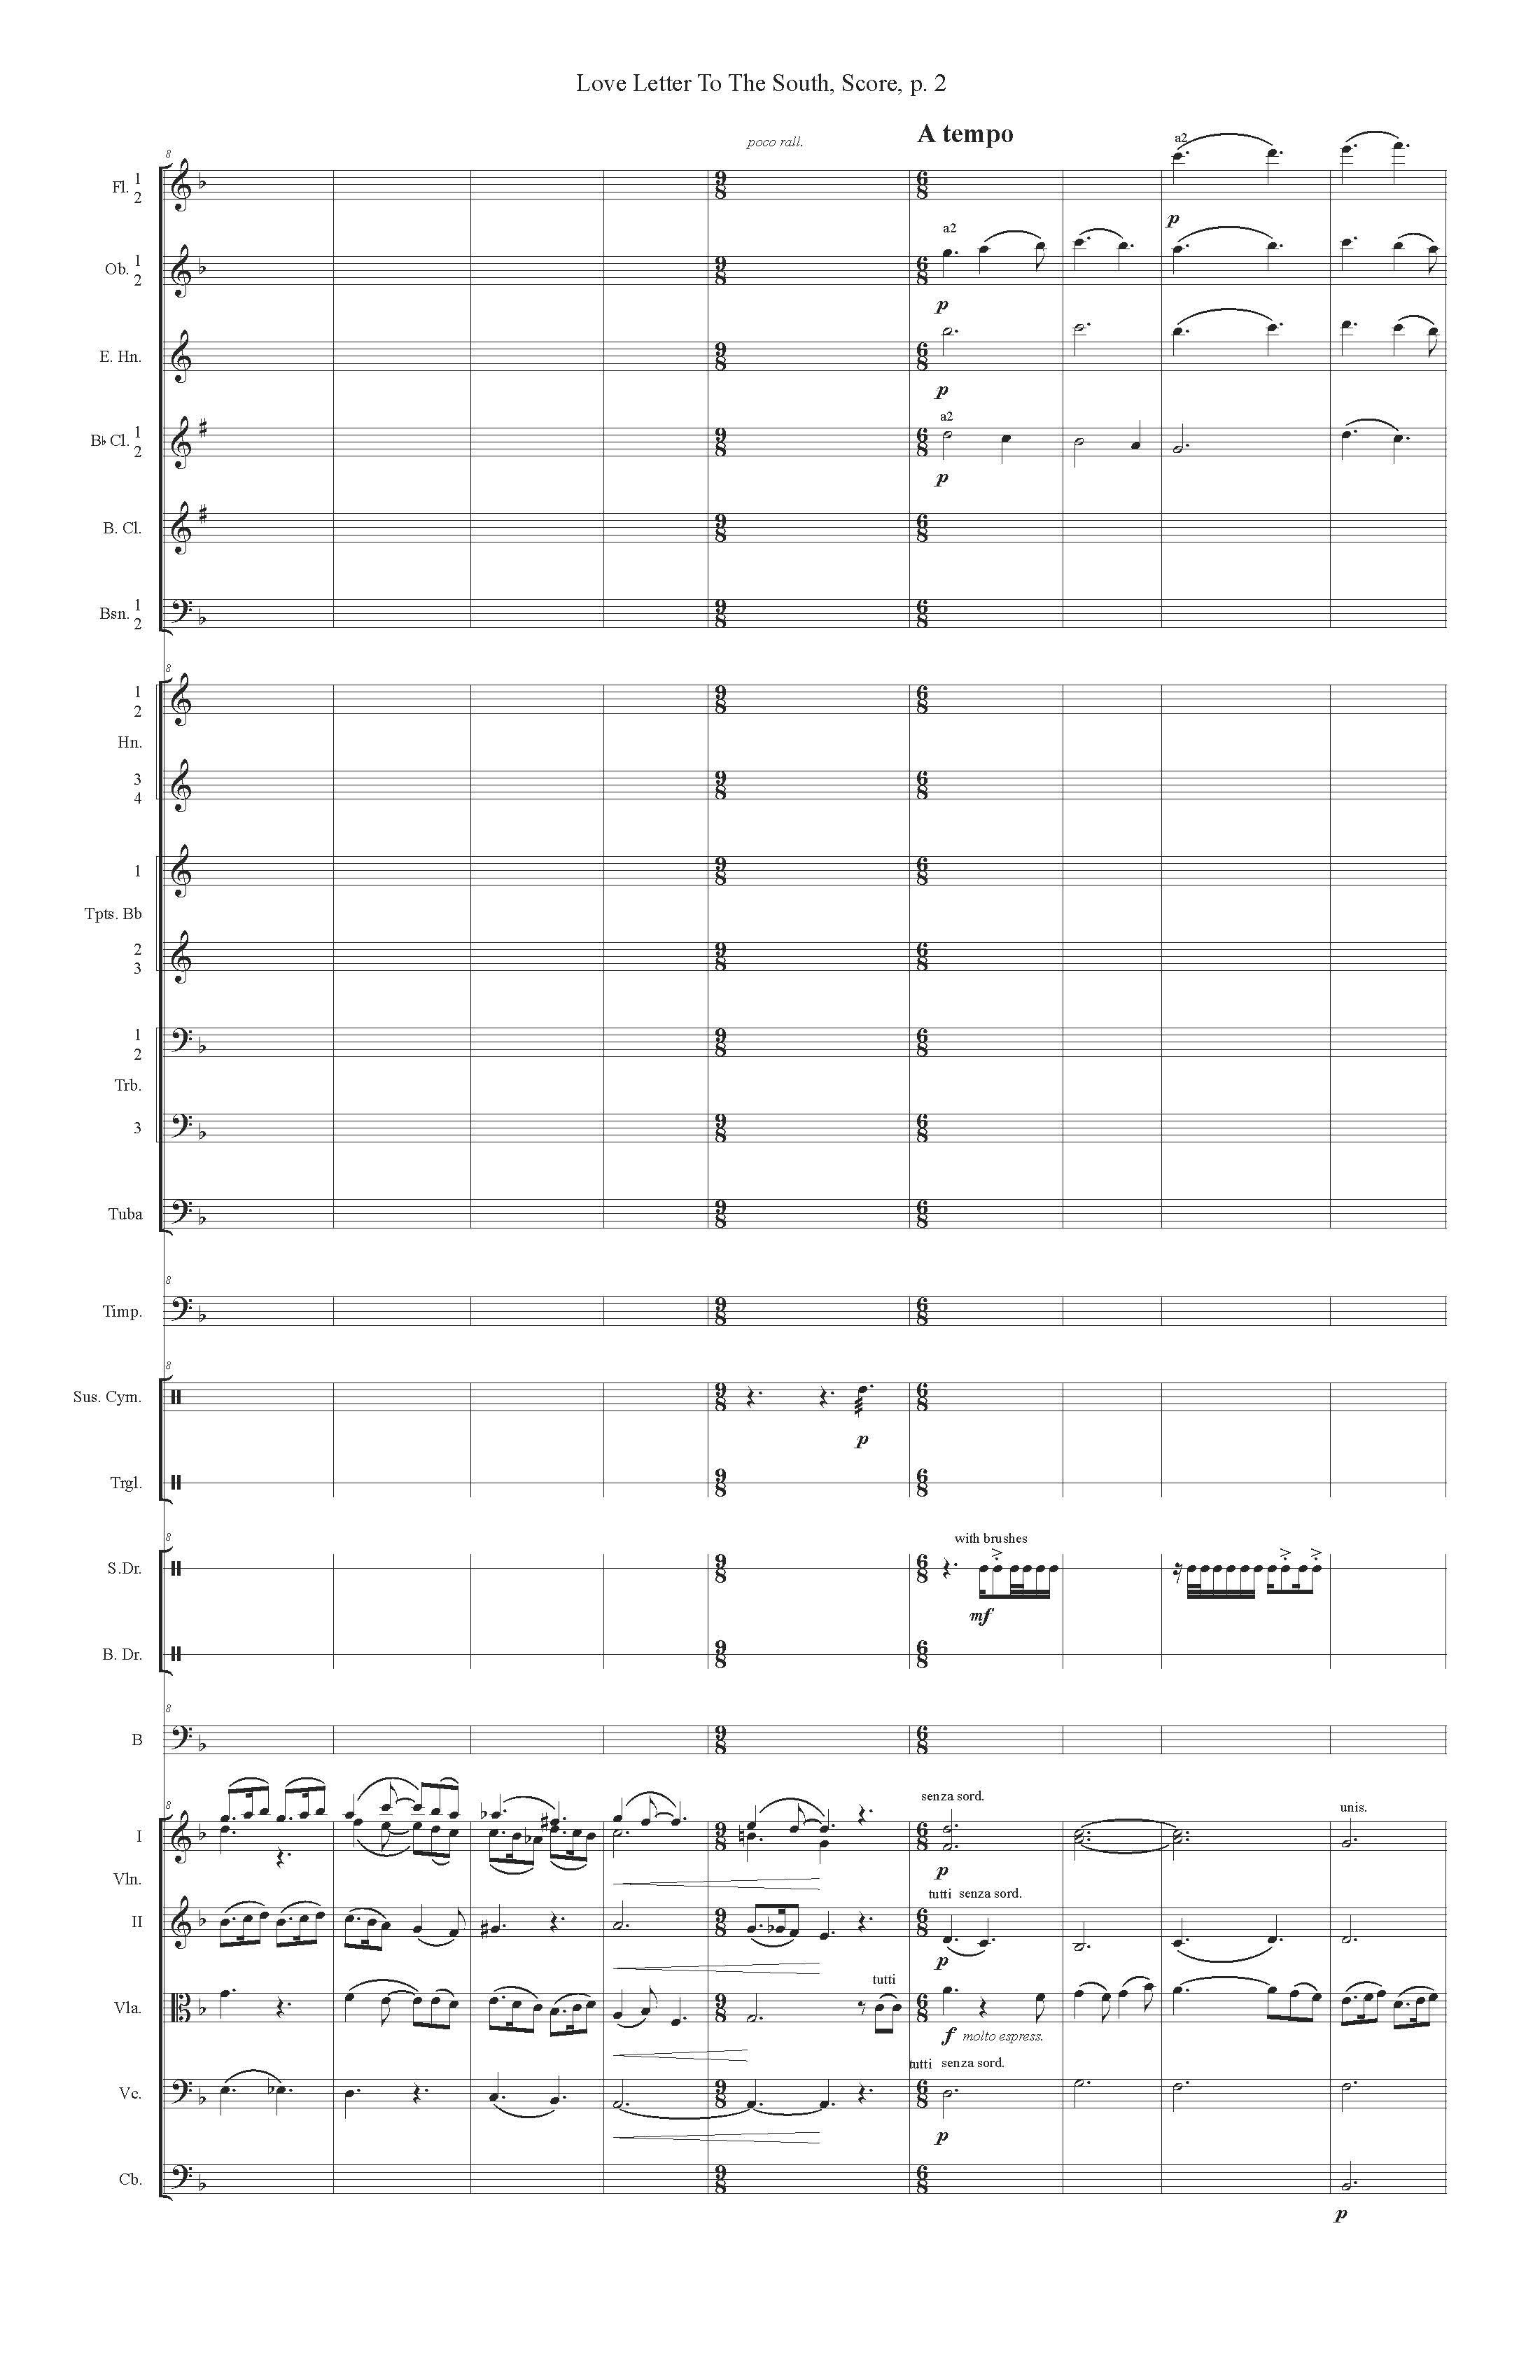 LOVE LETTER TO THE SOUTH ORCH - Score_Page_02.jpg